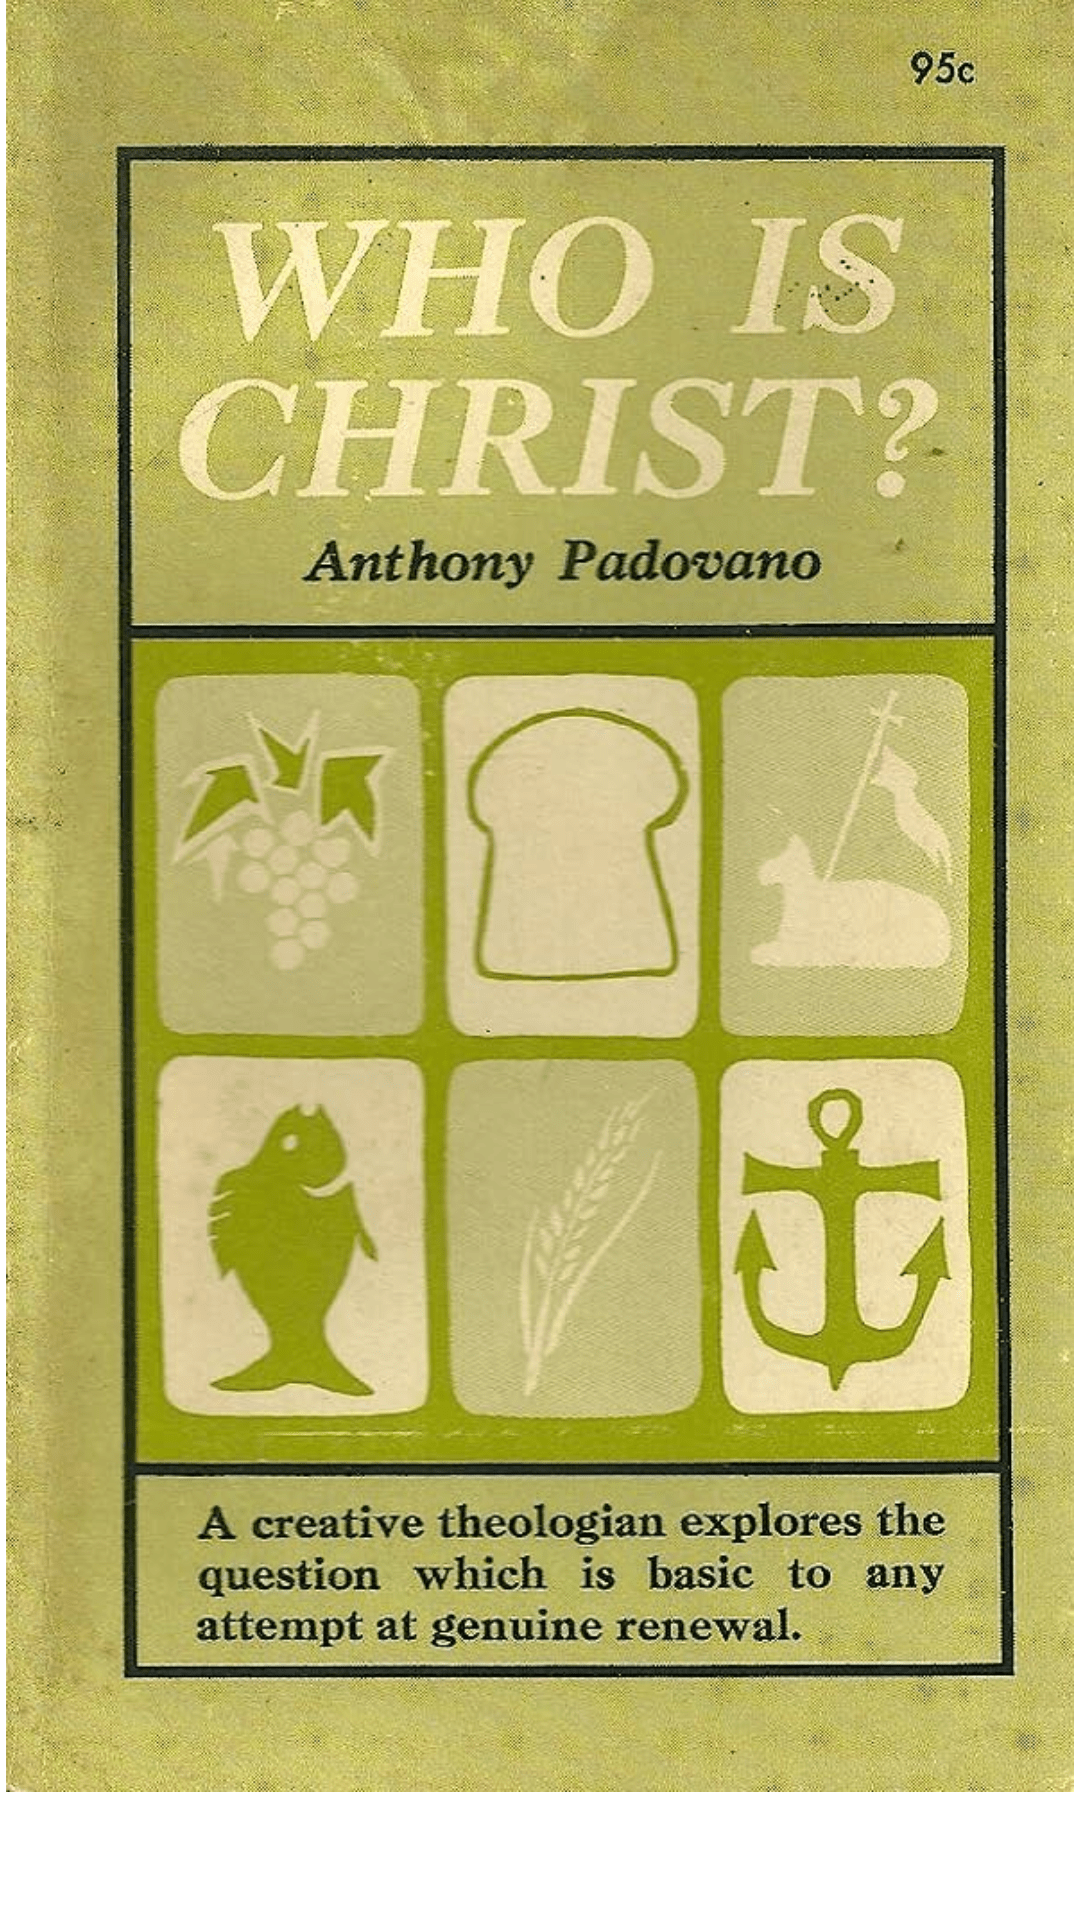 Who is Christ? by Anthony T. Padovano